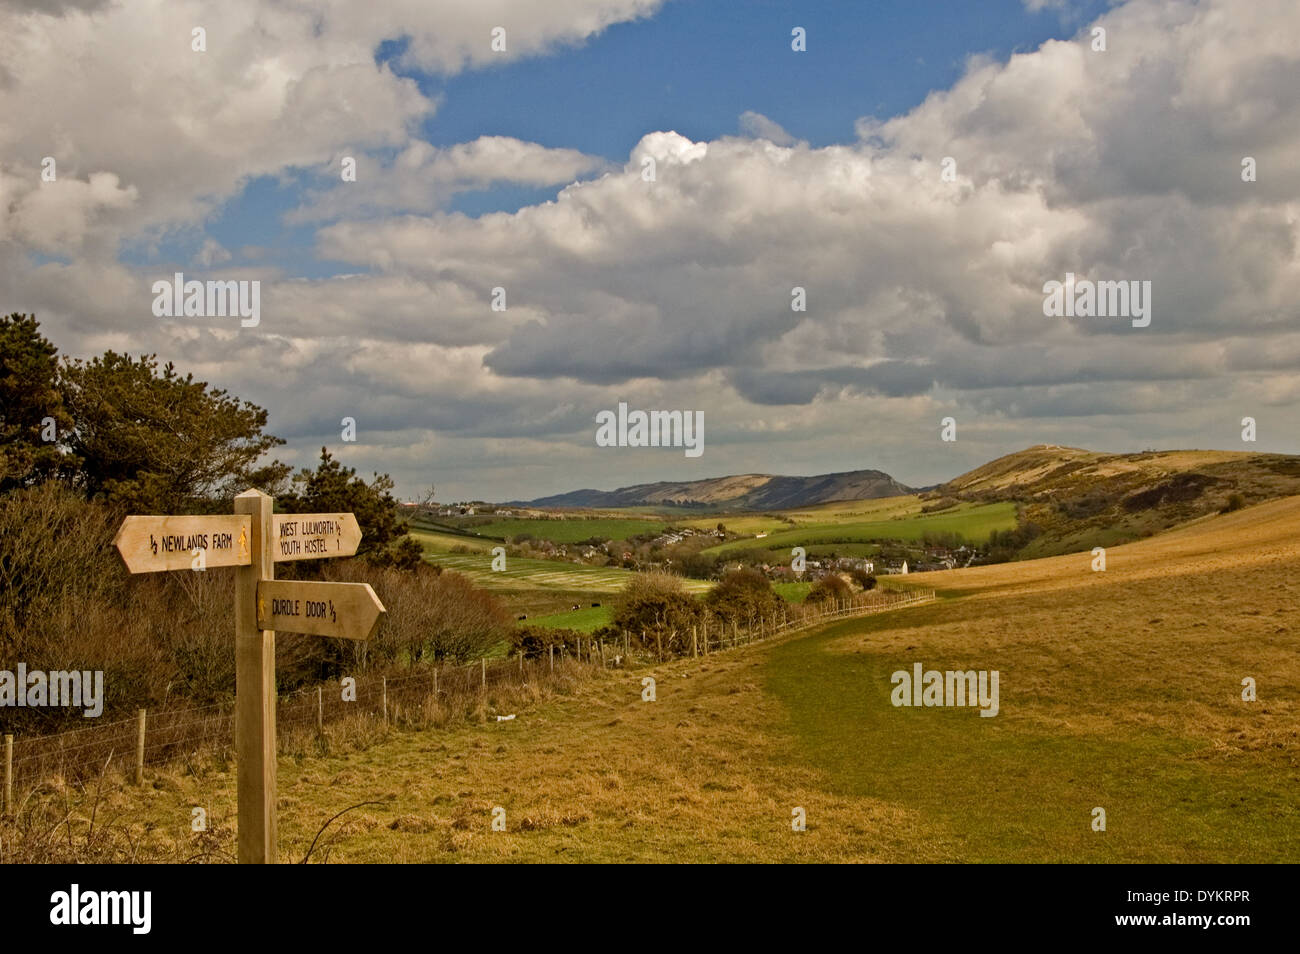 A timber directional sign pointing the way to Durdle Door, with the Purbeck Hills in the background. Stock Photo